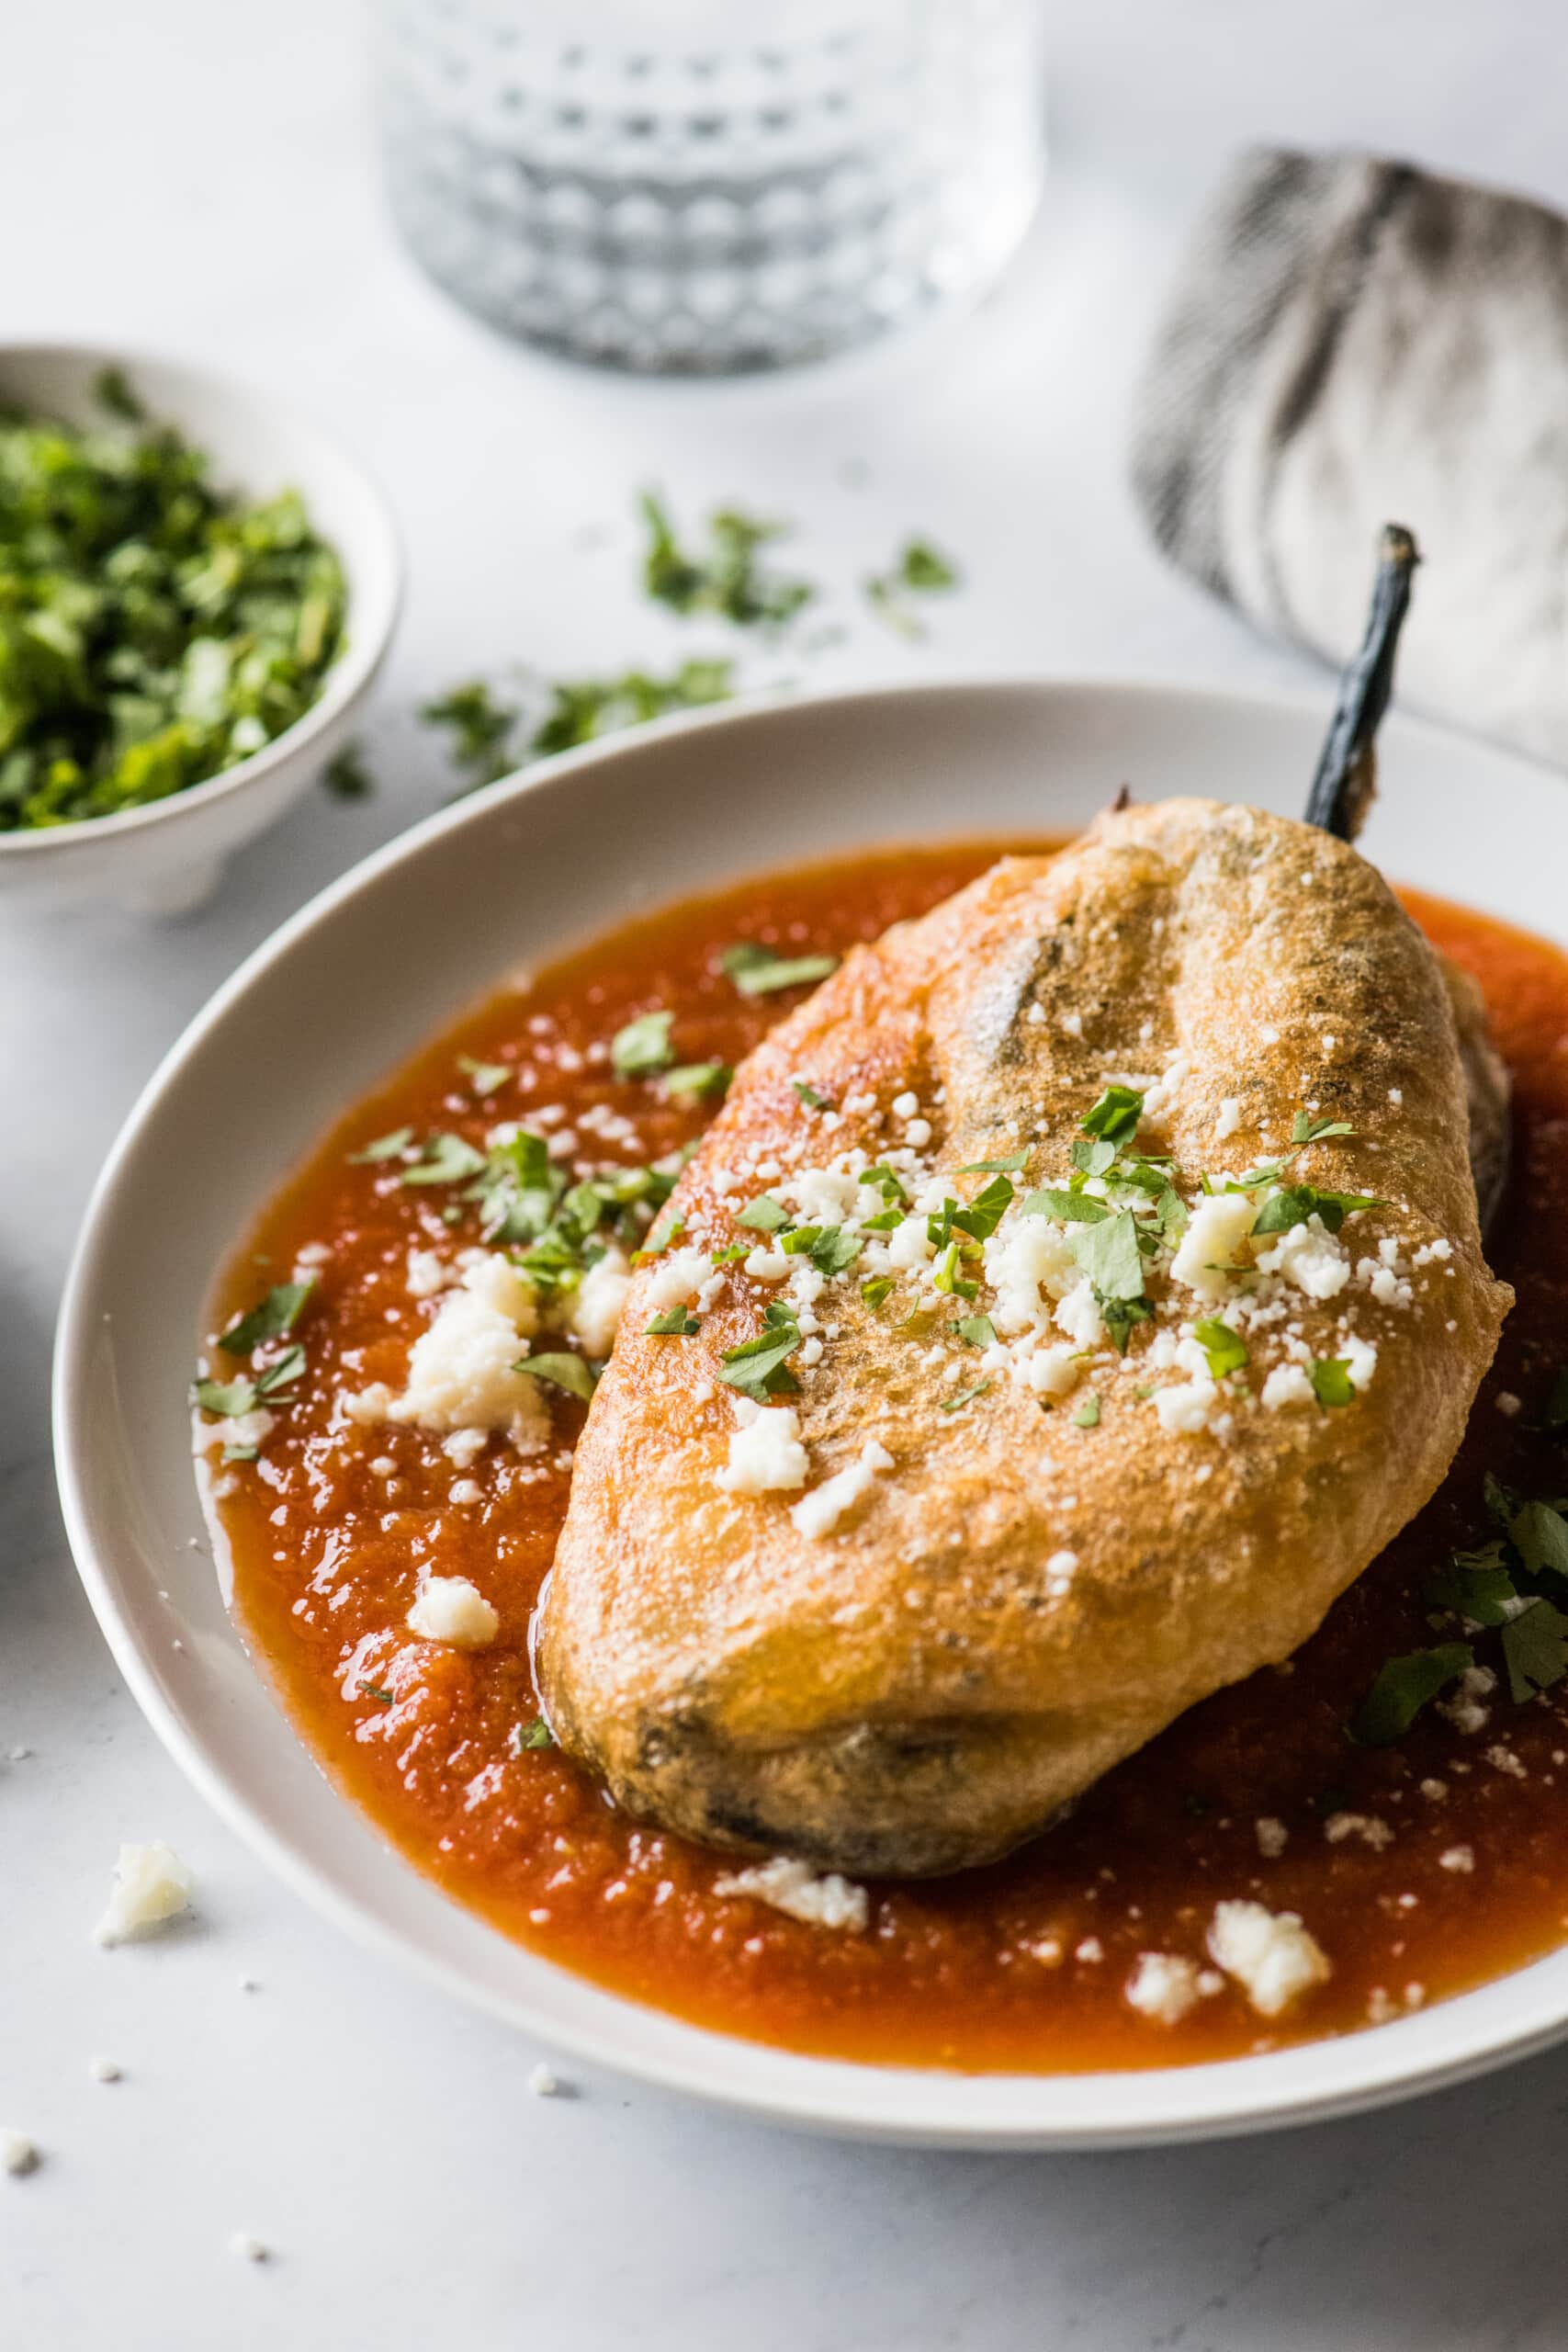 Chile Relleno Recipe - Isabel Eats